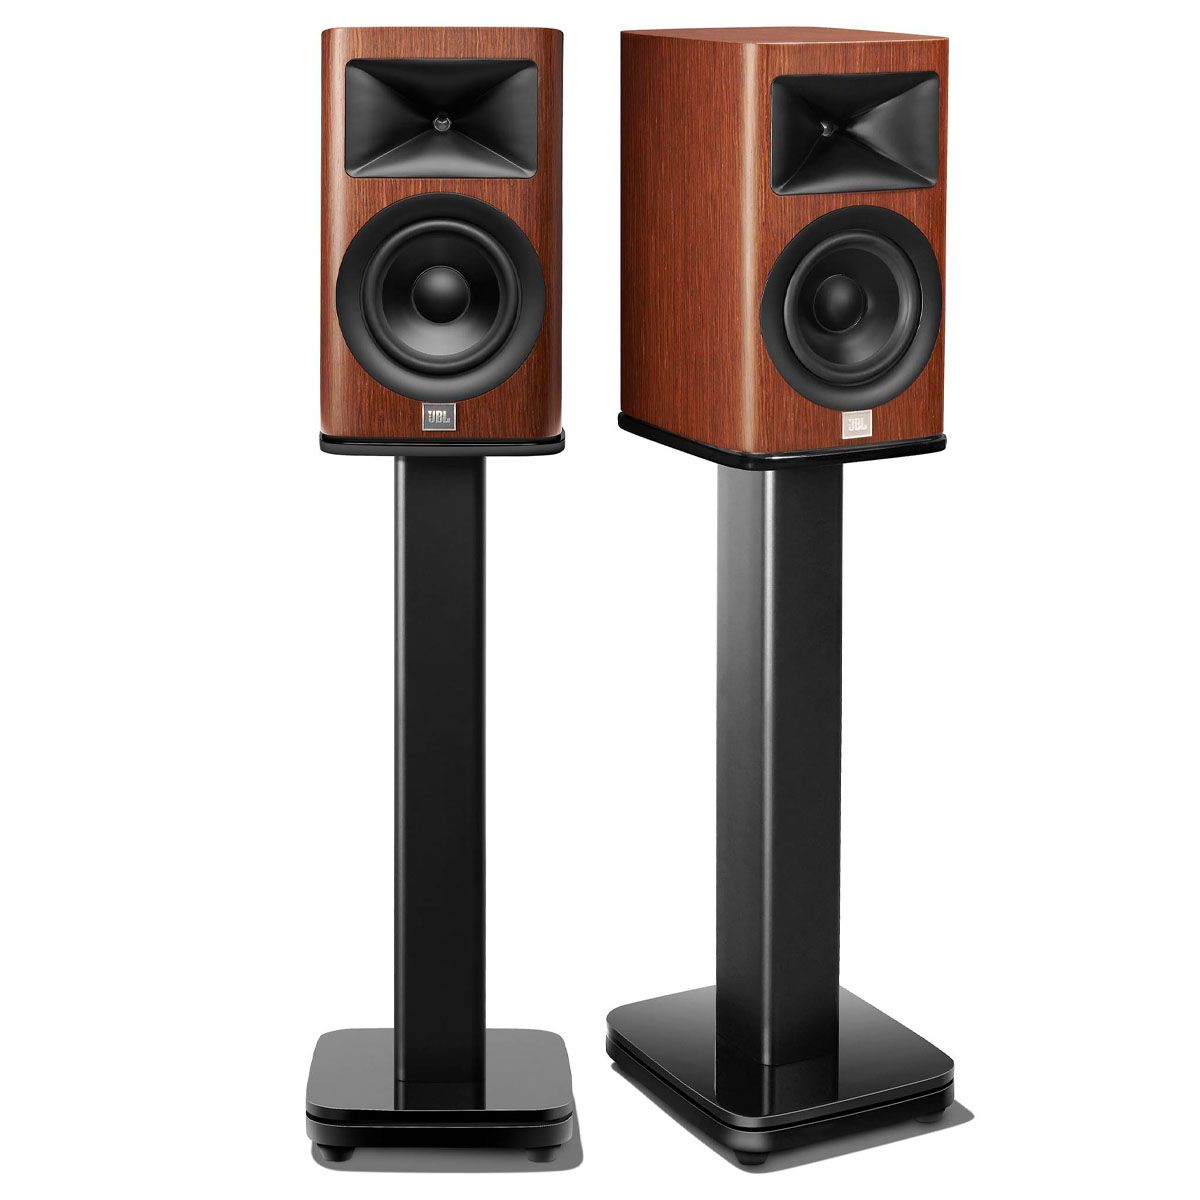 JBL HDI Series Floor Stands For HDI-1600